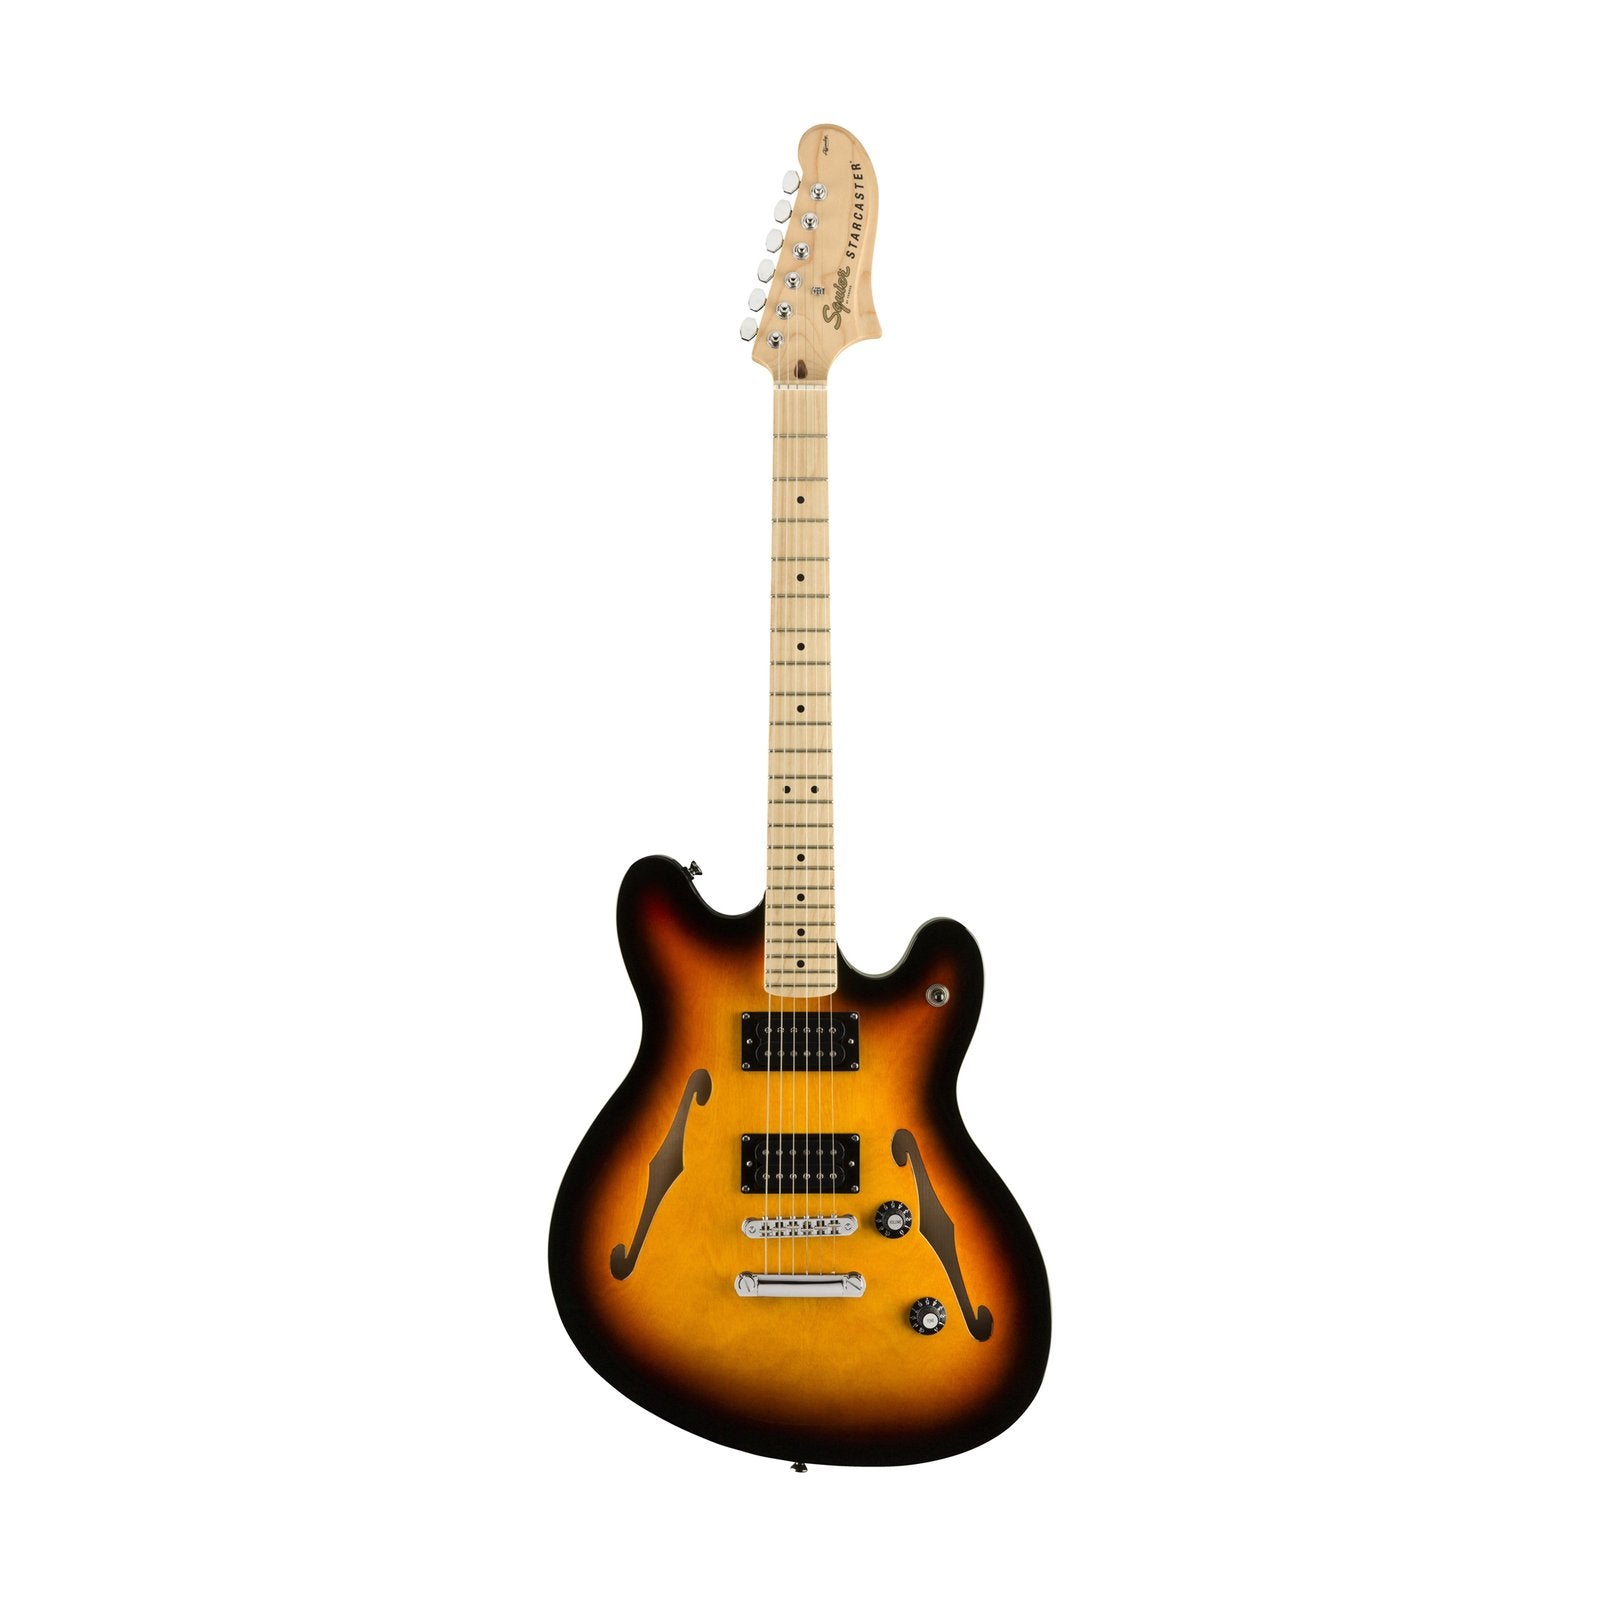 Squier Affinity Series Starcaster Electric Guitar, Maple FB, 3-Tone Sunburst, SQUIER BY FENDER, ELECTRIC GUITAR, squier-by-fender-electric-guitar-037-0590-500, ZOSO MUSIC SDN BHD